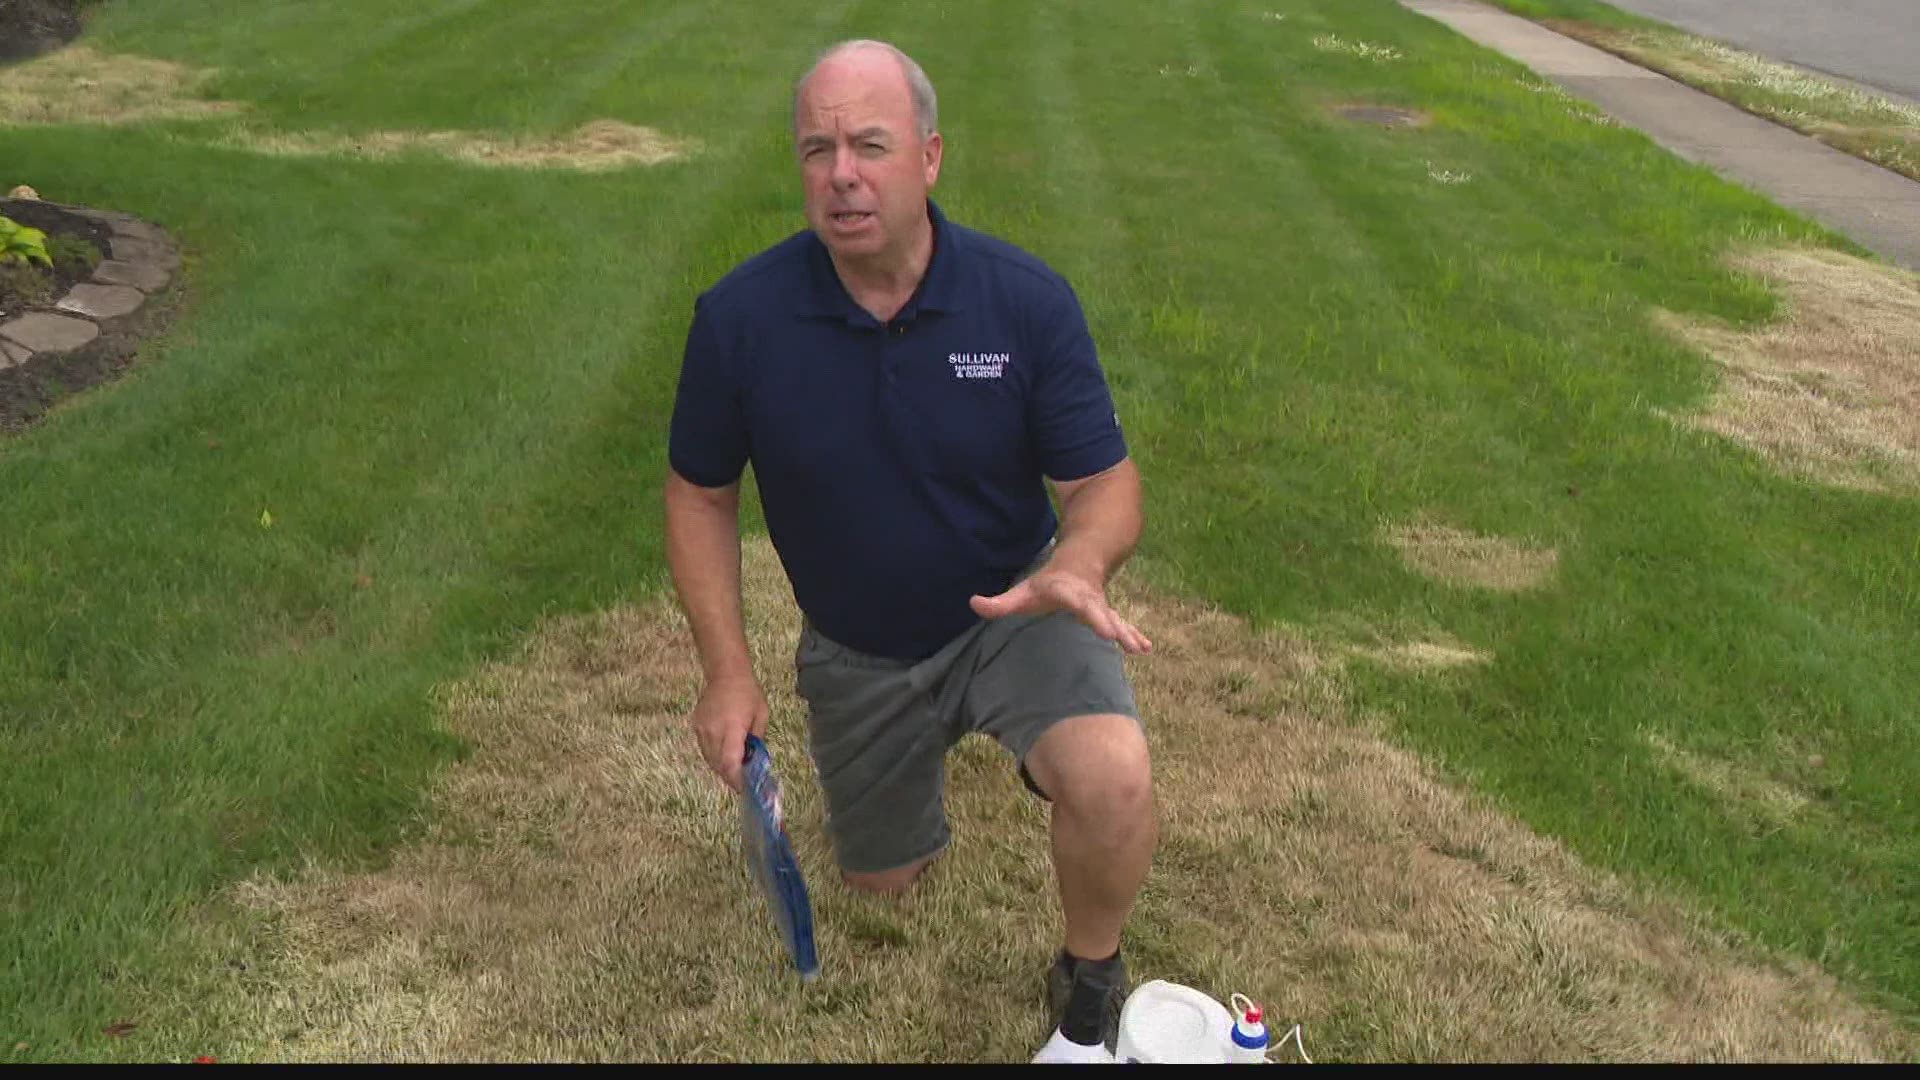 Pat explains how to prepare problem spots on your lawn for fall grass seeding.